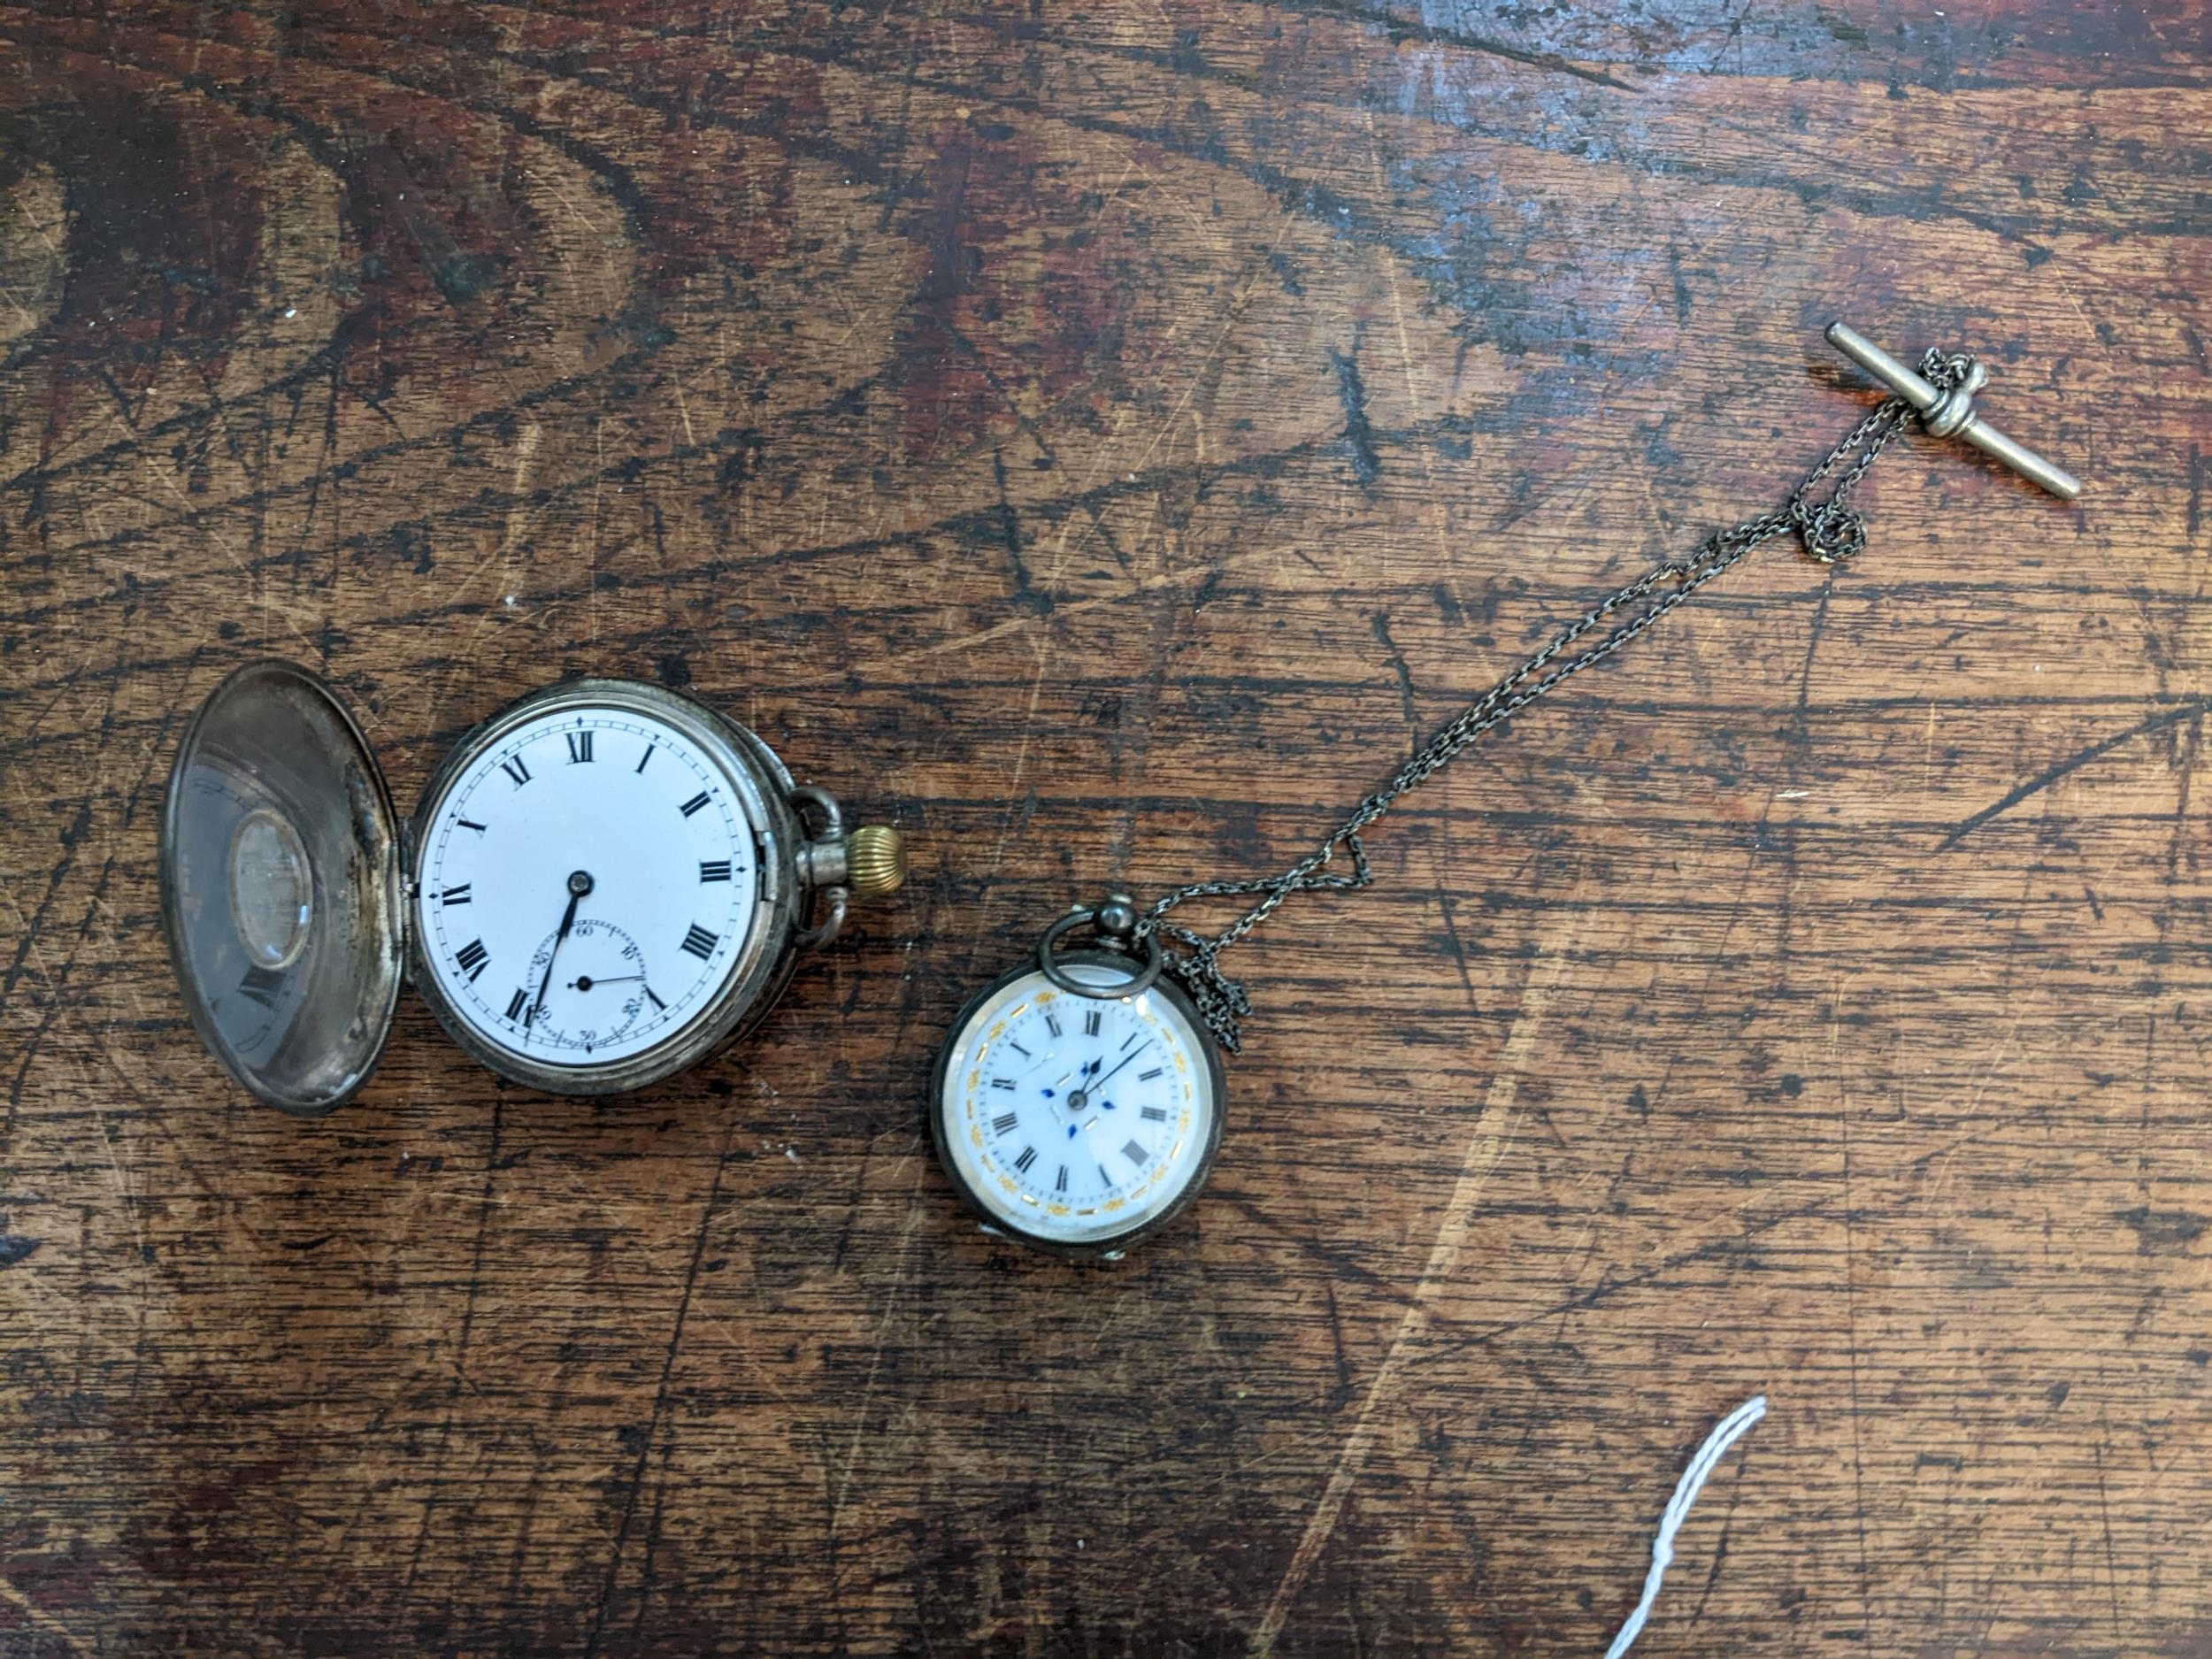 An early 20th century manual-wind half-hunter pocket watch, in silver Dennison case, with blue